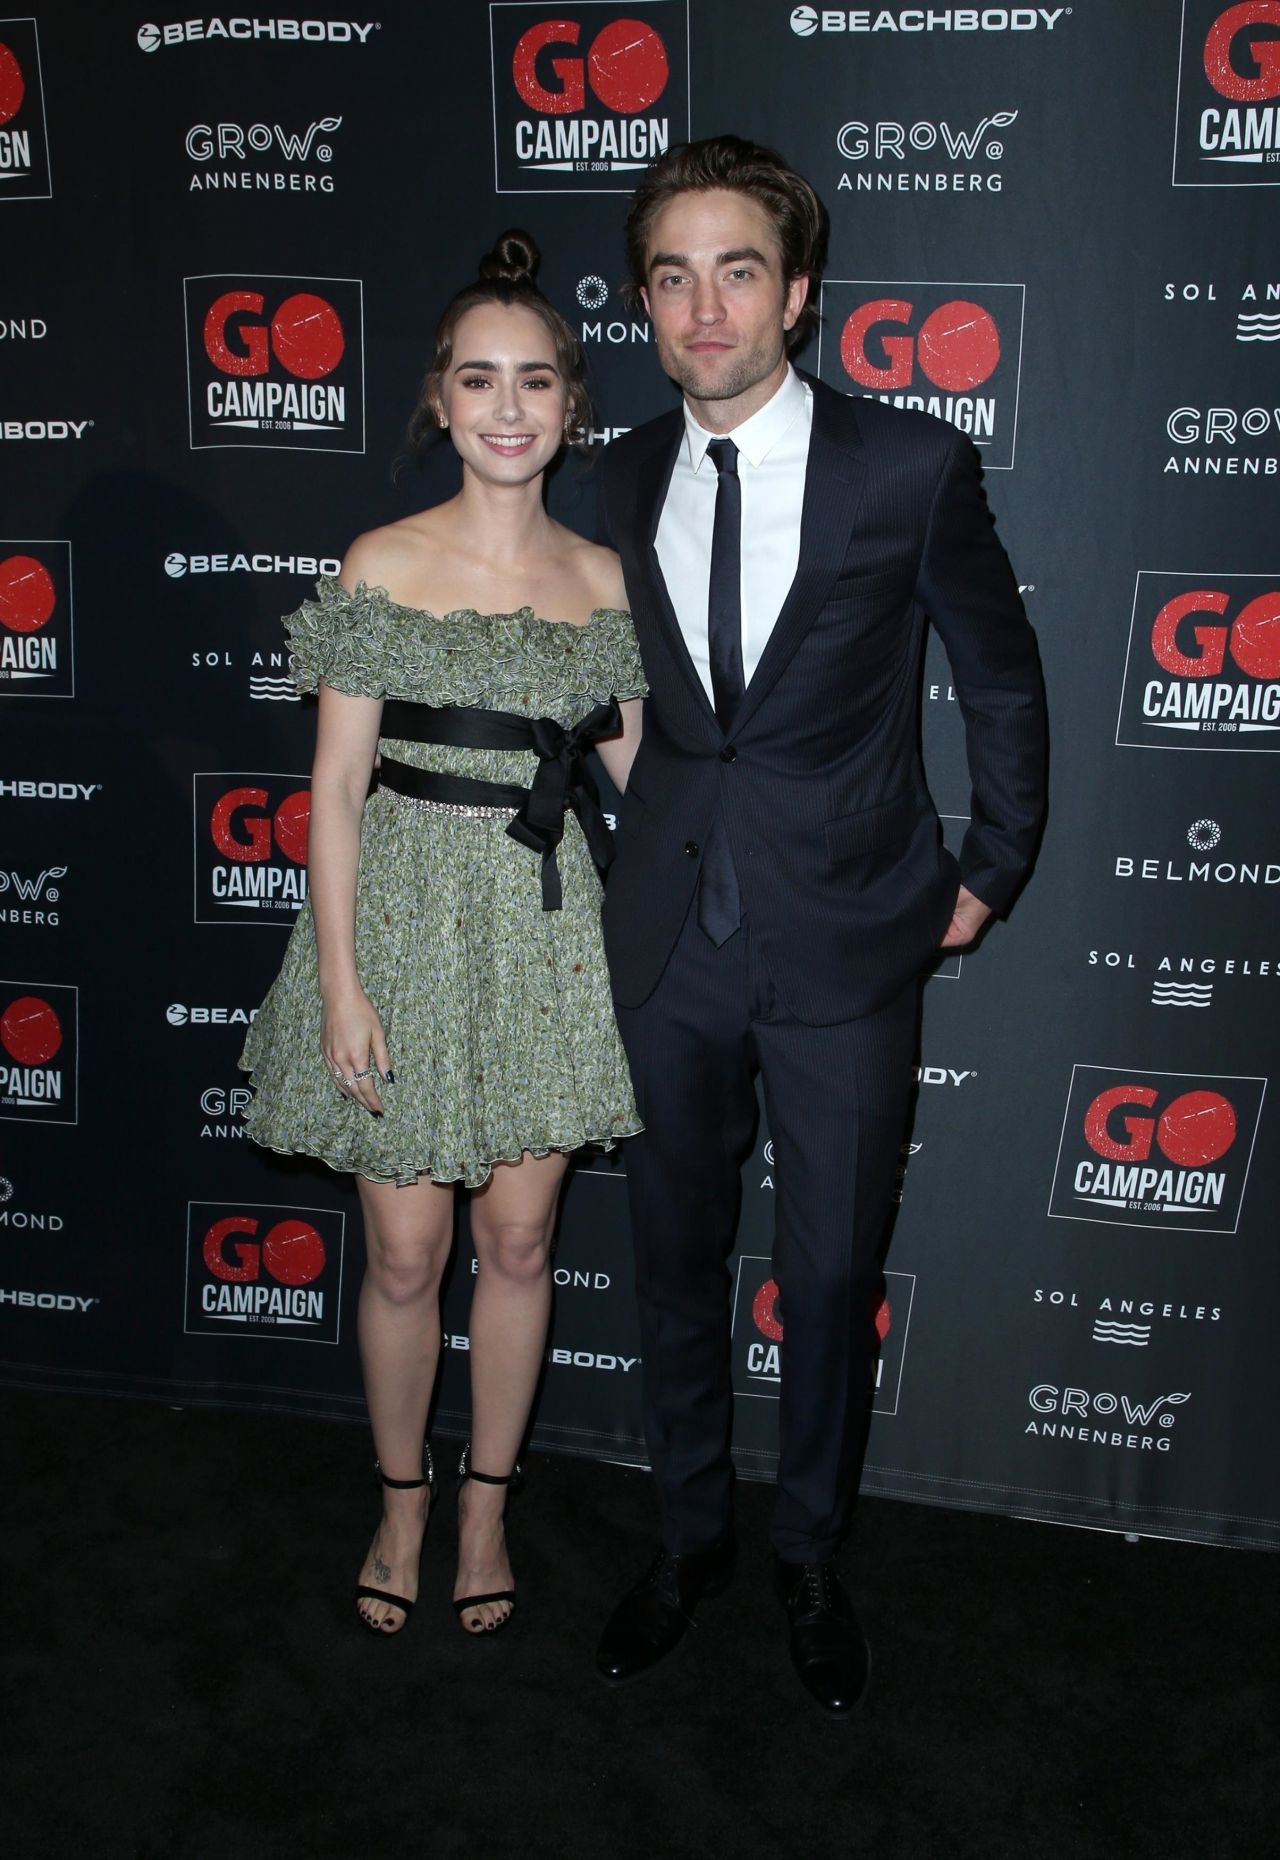 lily-collins-go-campaign-gala-in-los-angeles-10-20-2018-14.jpg